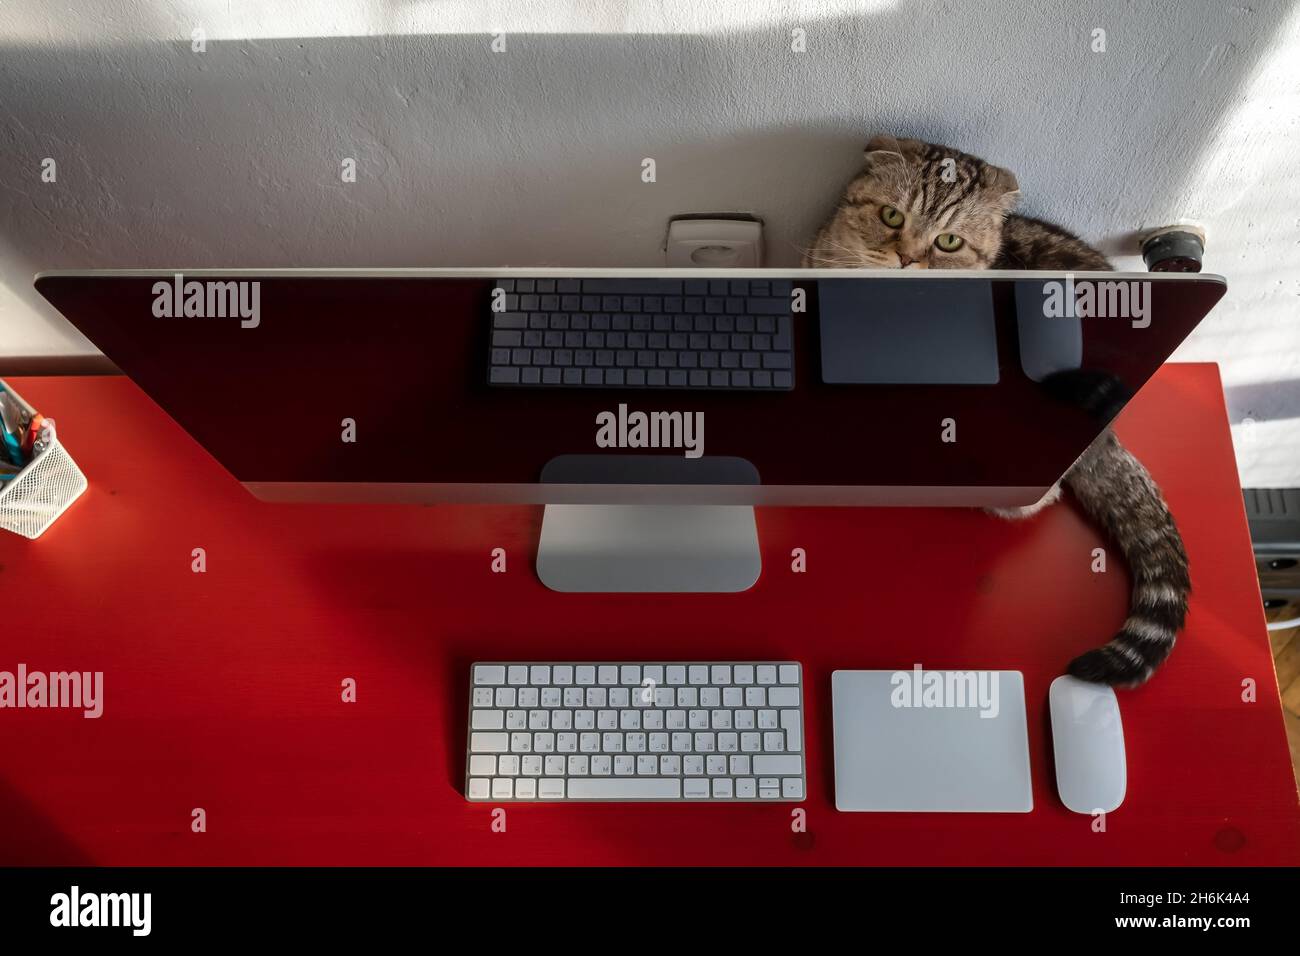 Charming cat hid behind the computer, on the desktop, where the keyboard, touchpad and mouse are located. Modern lifestyle concept.  Stock Photo